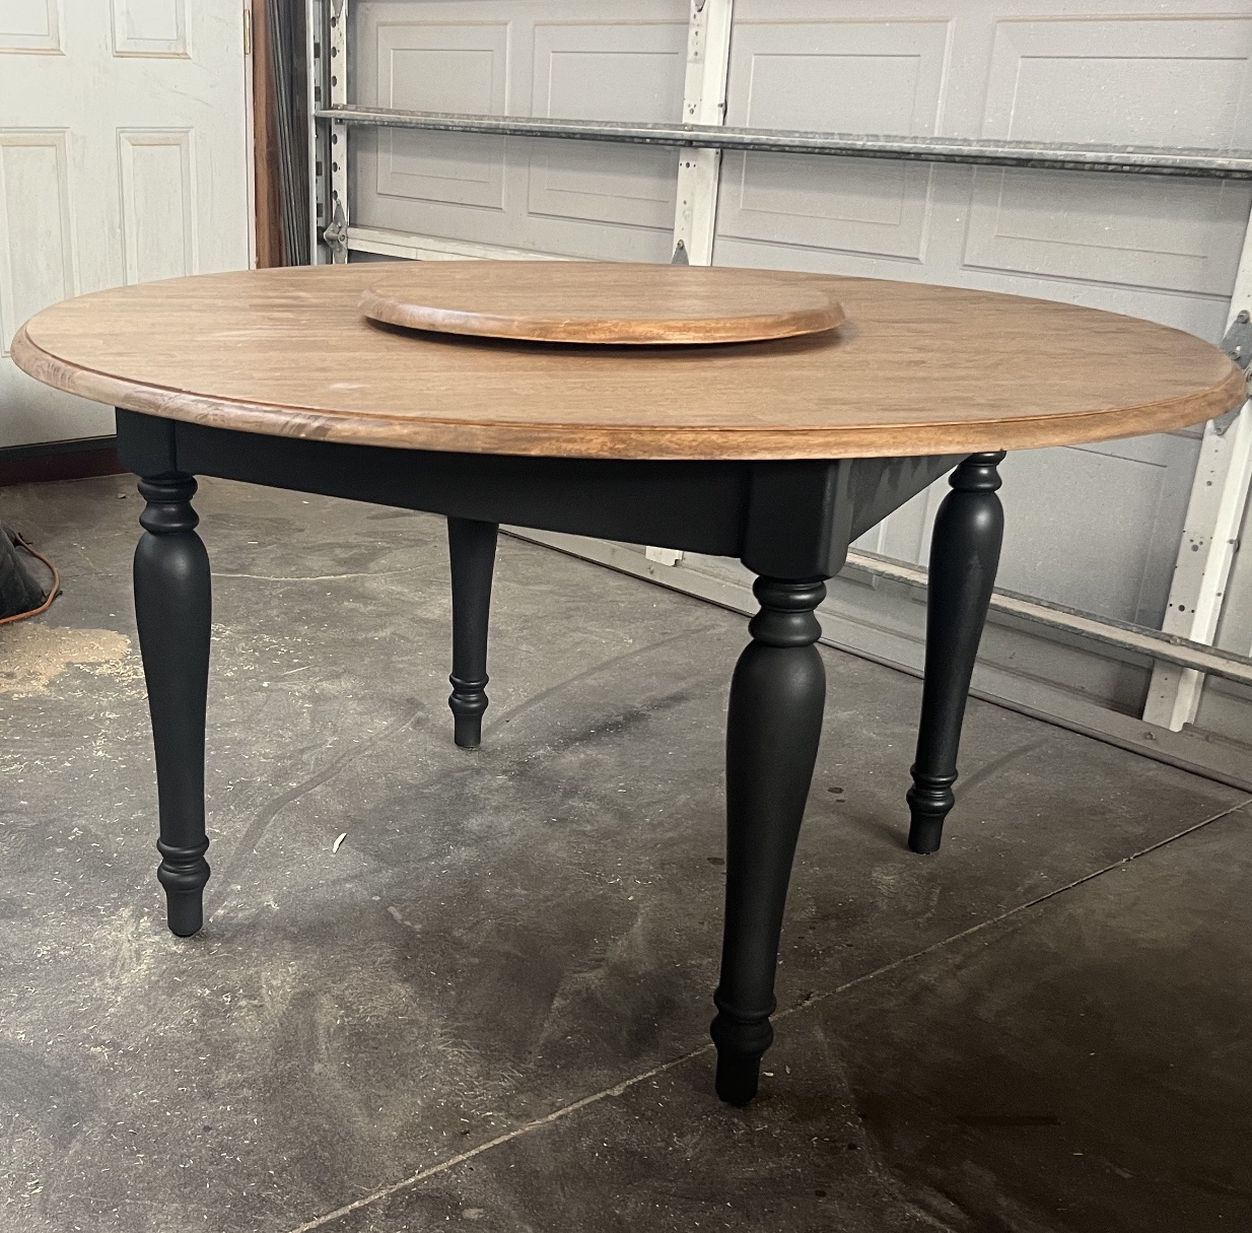 56” Round Dining Table